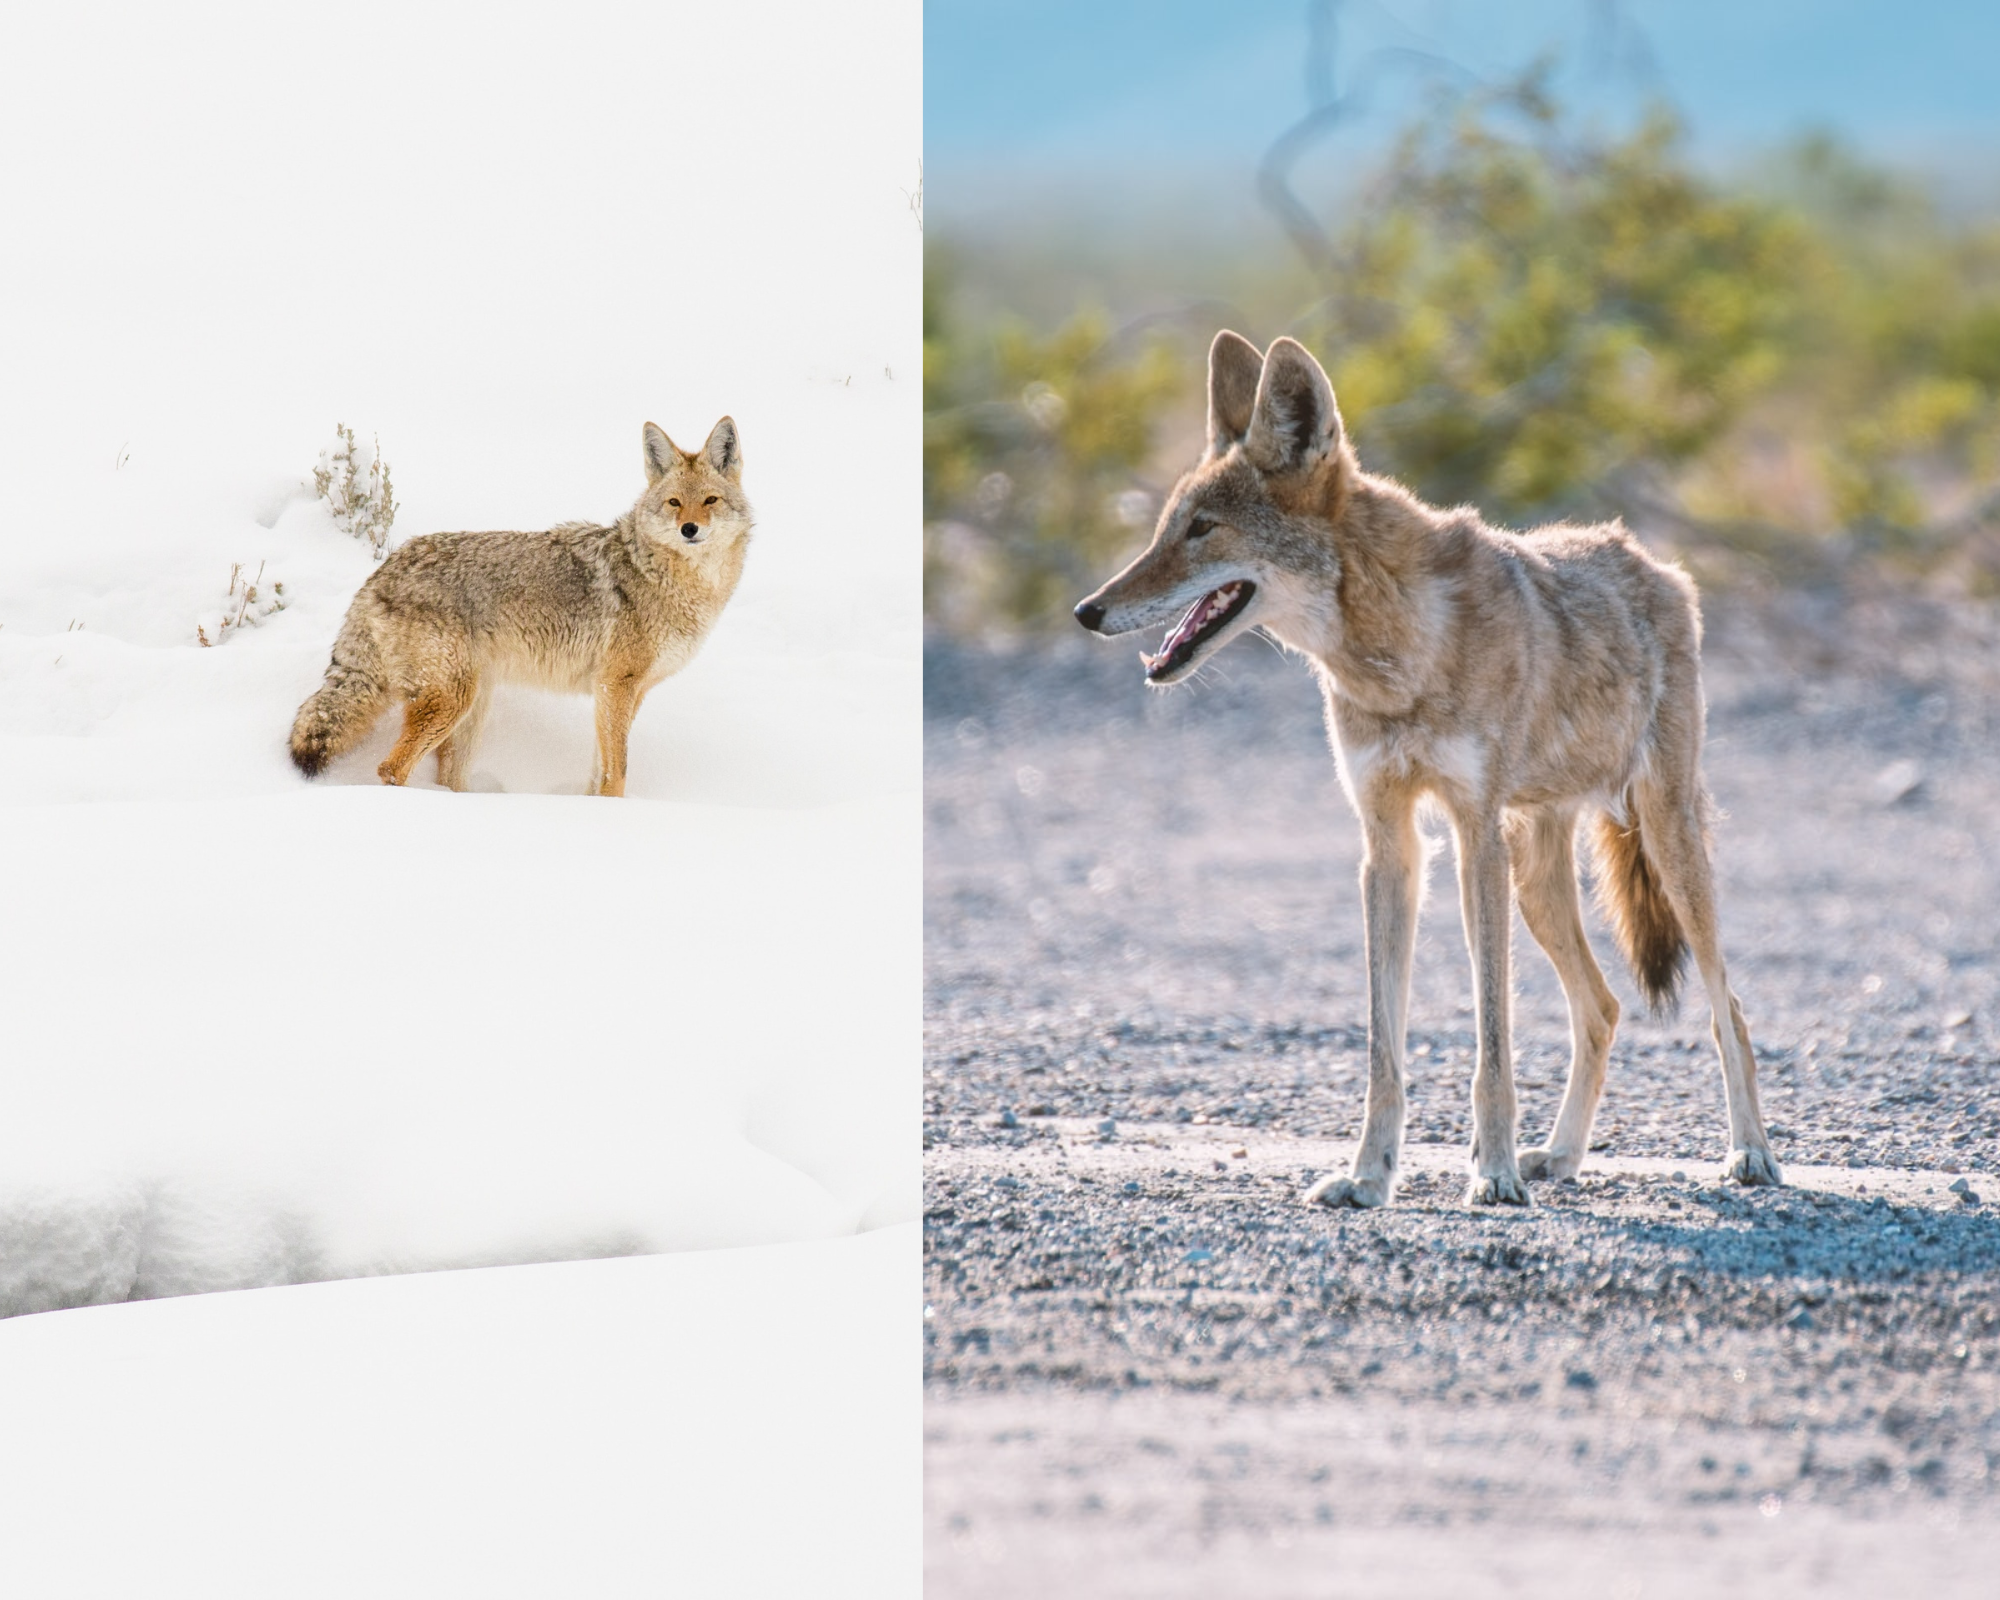 Konijn Circulaire Frons Mammoth Lakes Wildlife Highlight: The Mountain Coyote | Mammoth Lakes Blog